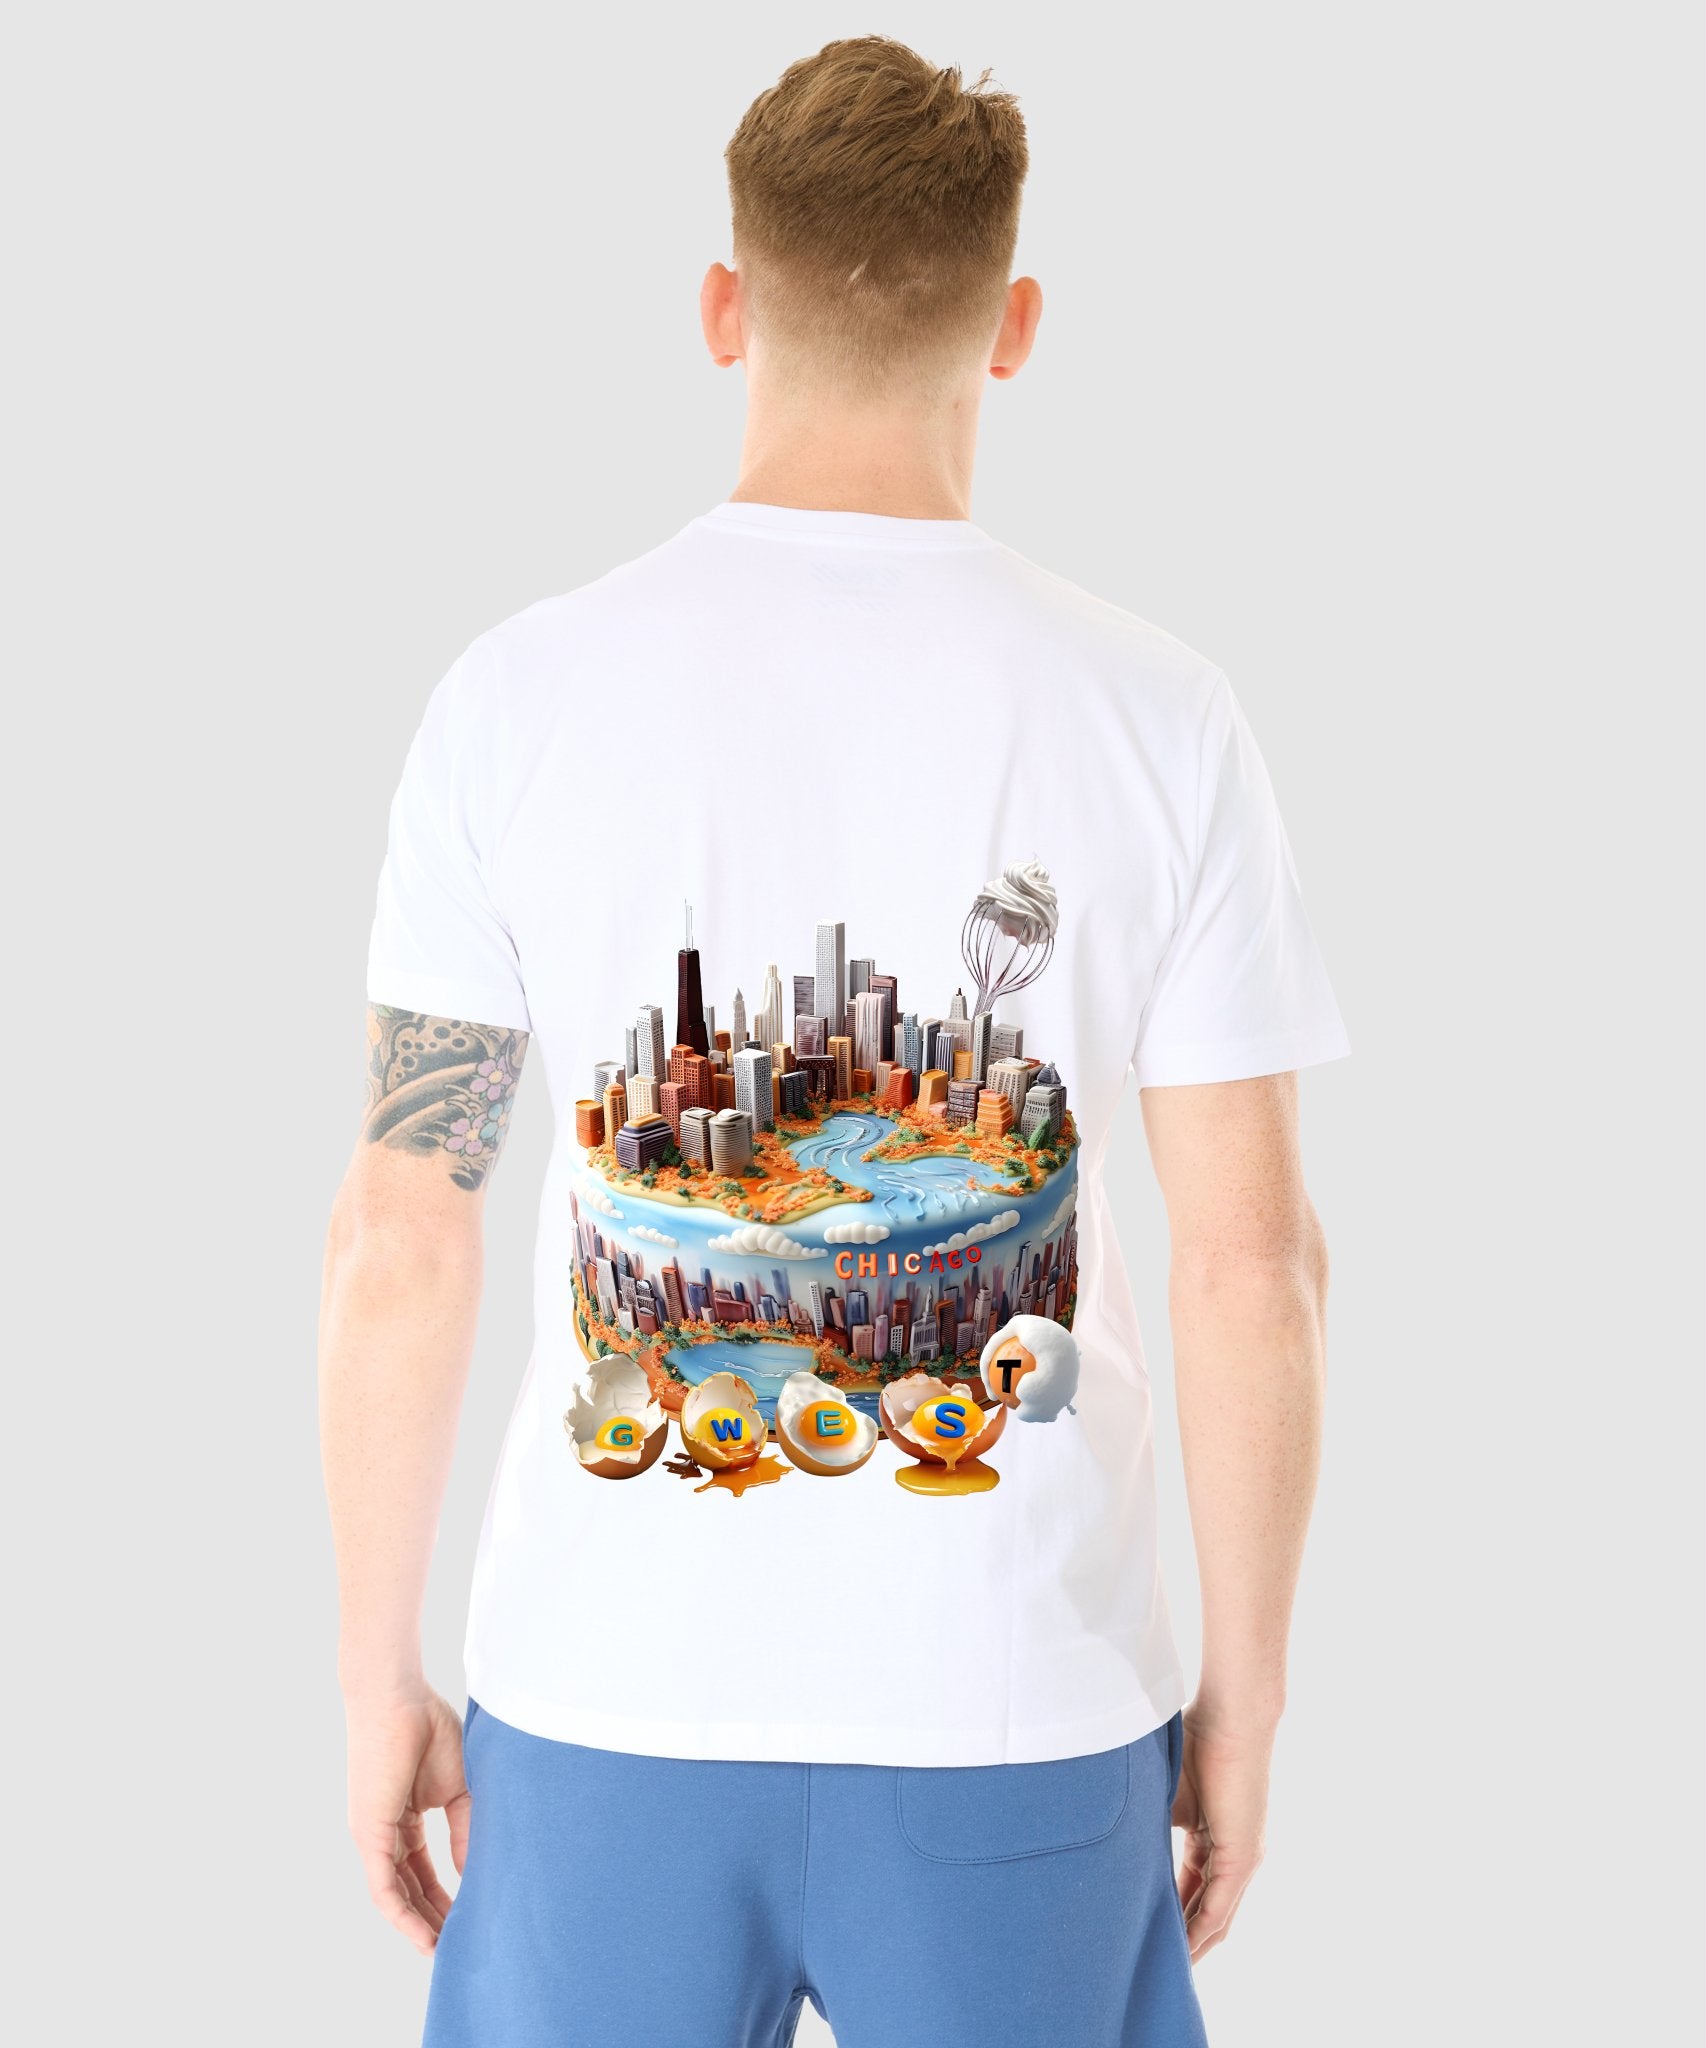 G WEST CHICAGO CAKE T-SHIRT - 12 COLORS